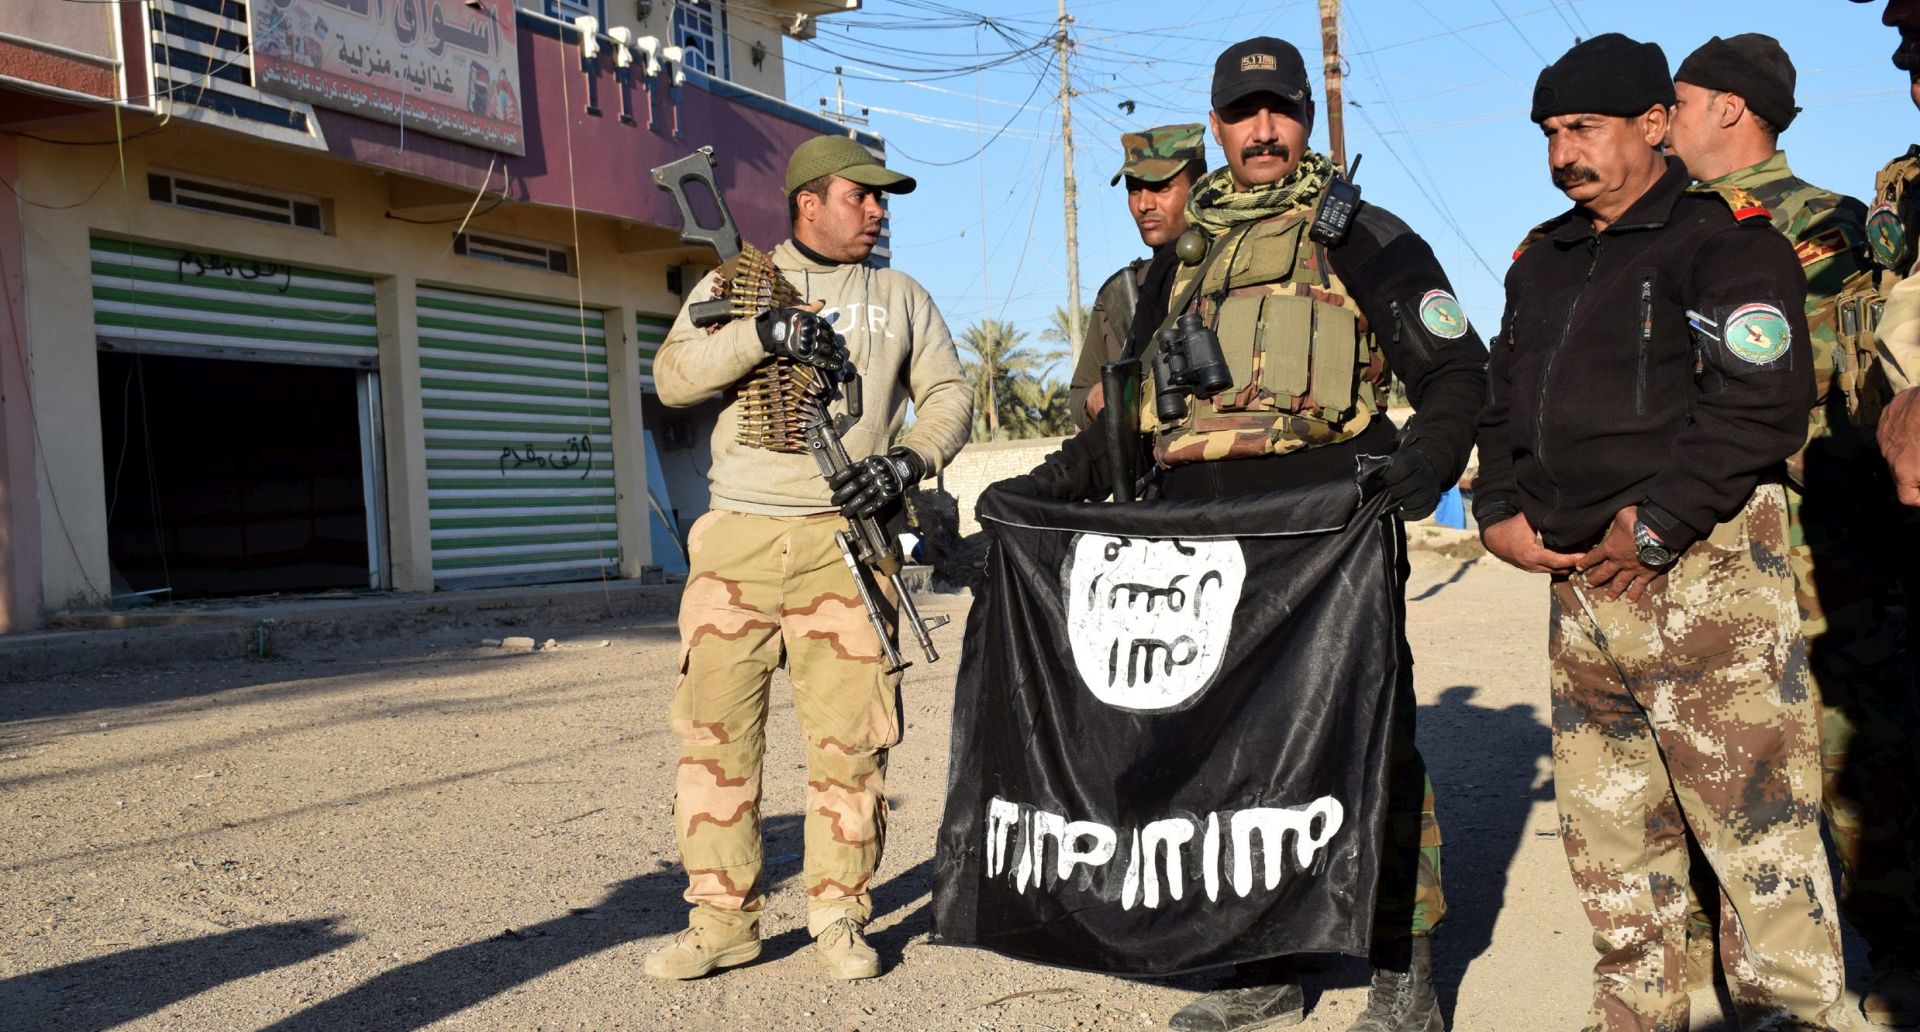 epa05106689 A photograph made available on 17 January 2016 shows Iraqi soldiers holding a flag of the Islamic State group after they gained control of the Ramadi city, western Iraq, 16 January 2016. Iraqi government last month announced the "liberation" of the western city of Ramadi from Islamic State, marking the first major setback for the radical Sunni group since April. Since Ramadi's recapture, IS has carried out a series of attacks in several parts of Iraq where it still controls large swathes of territory.  EPA/NAWRAS AAMER